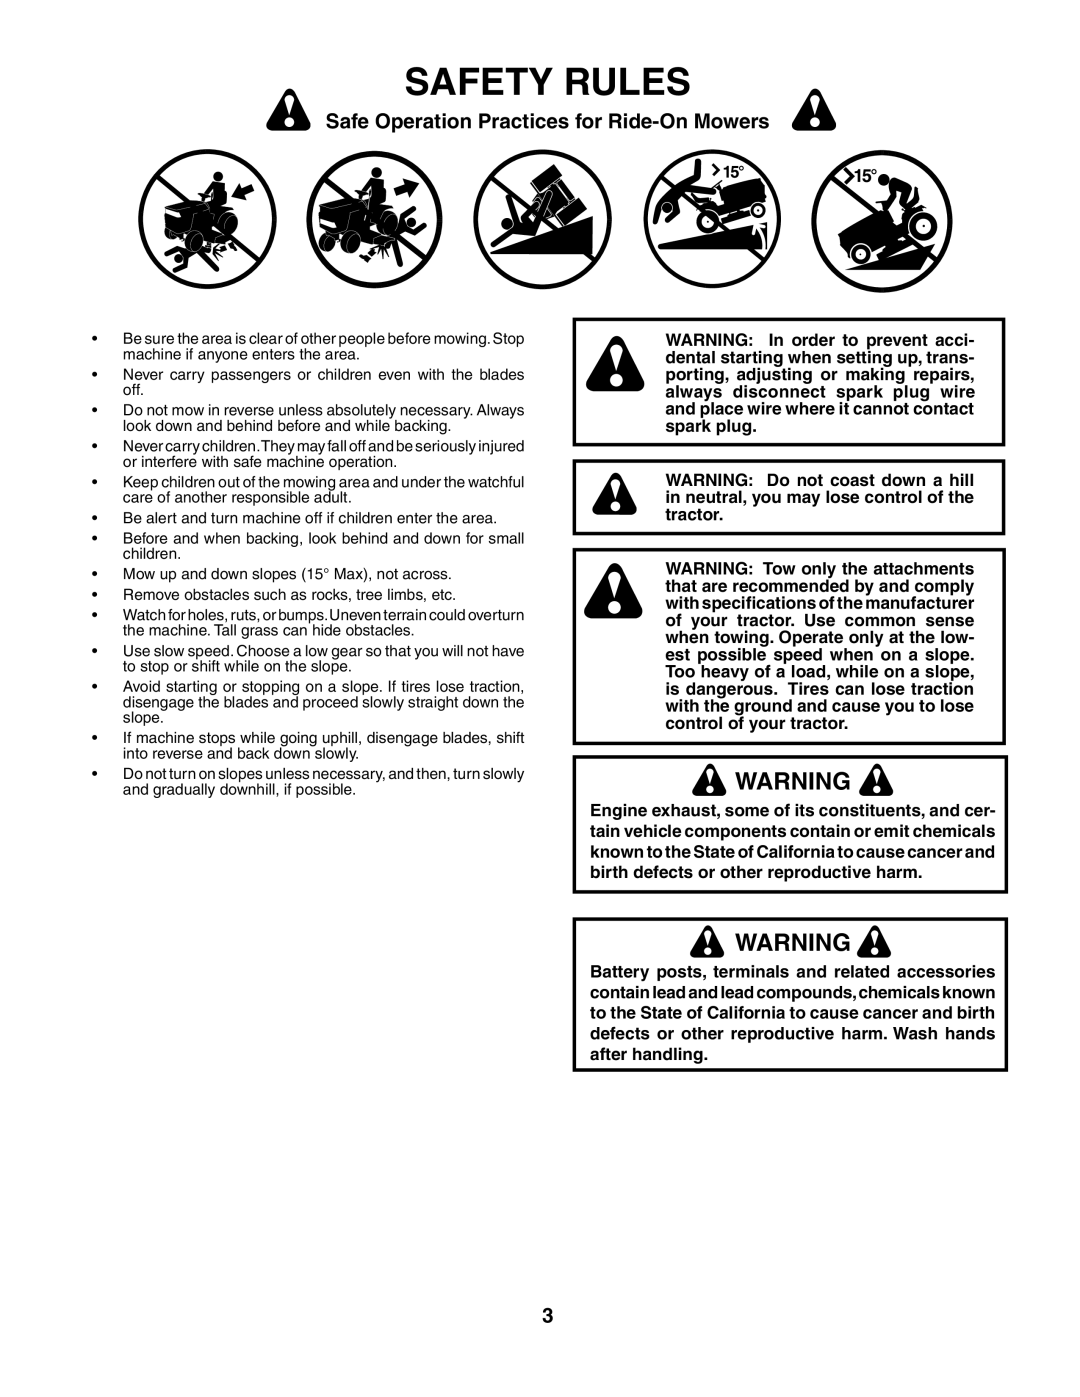 Husqvarna YTH2548 owner manual Safety Rules, Safe Operation Practices for Ride-On Mowers, 7!2.. NN ORDERE TO PREVENT ACCI 